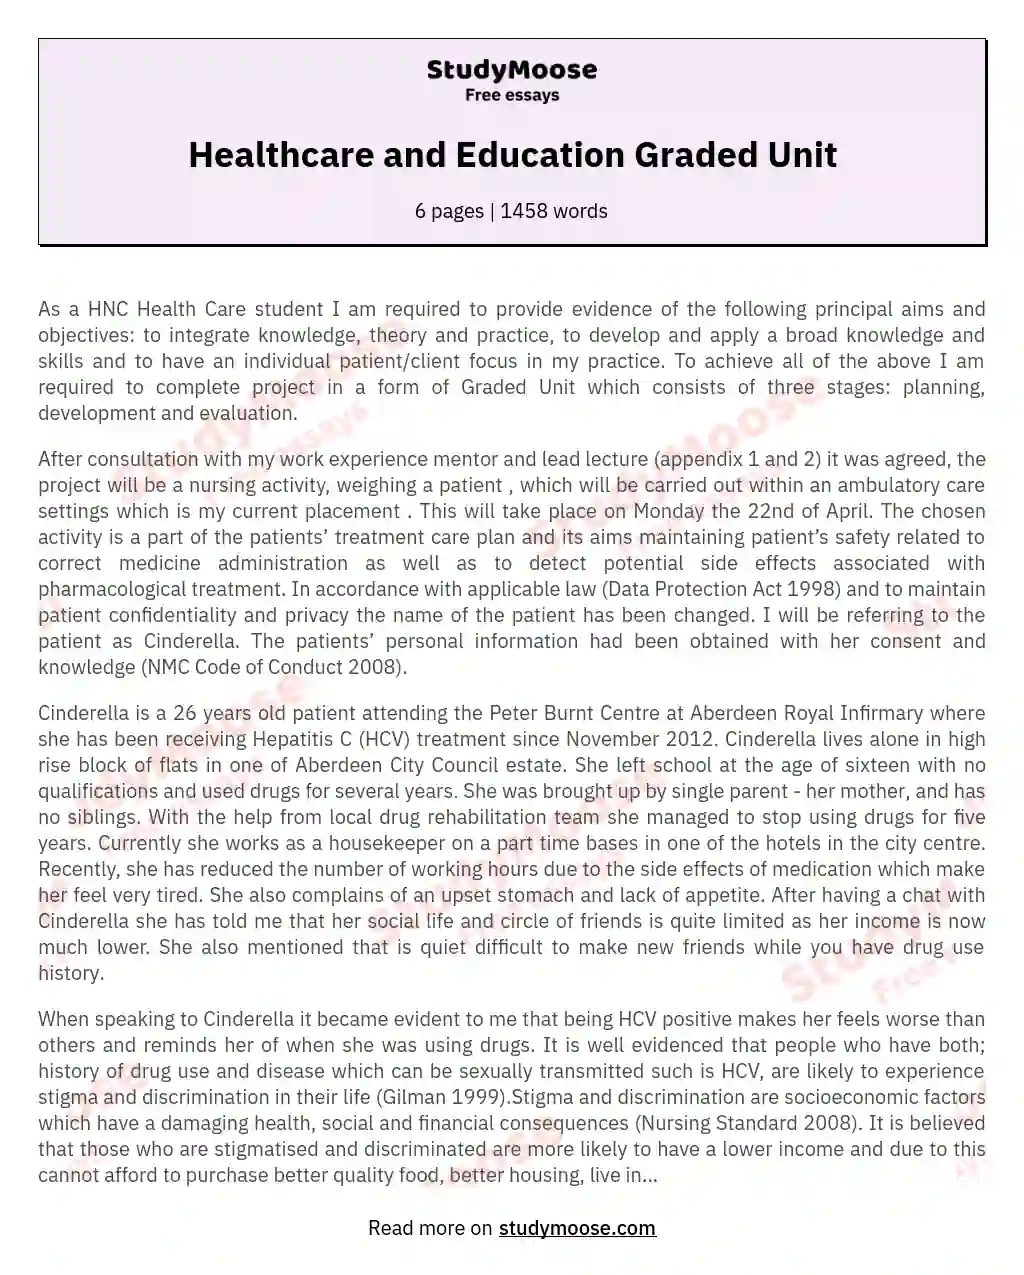 Healthcare and Education Graded Unit essay